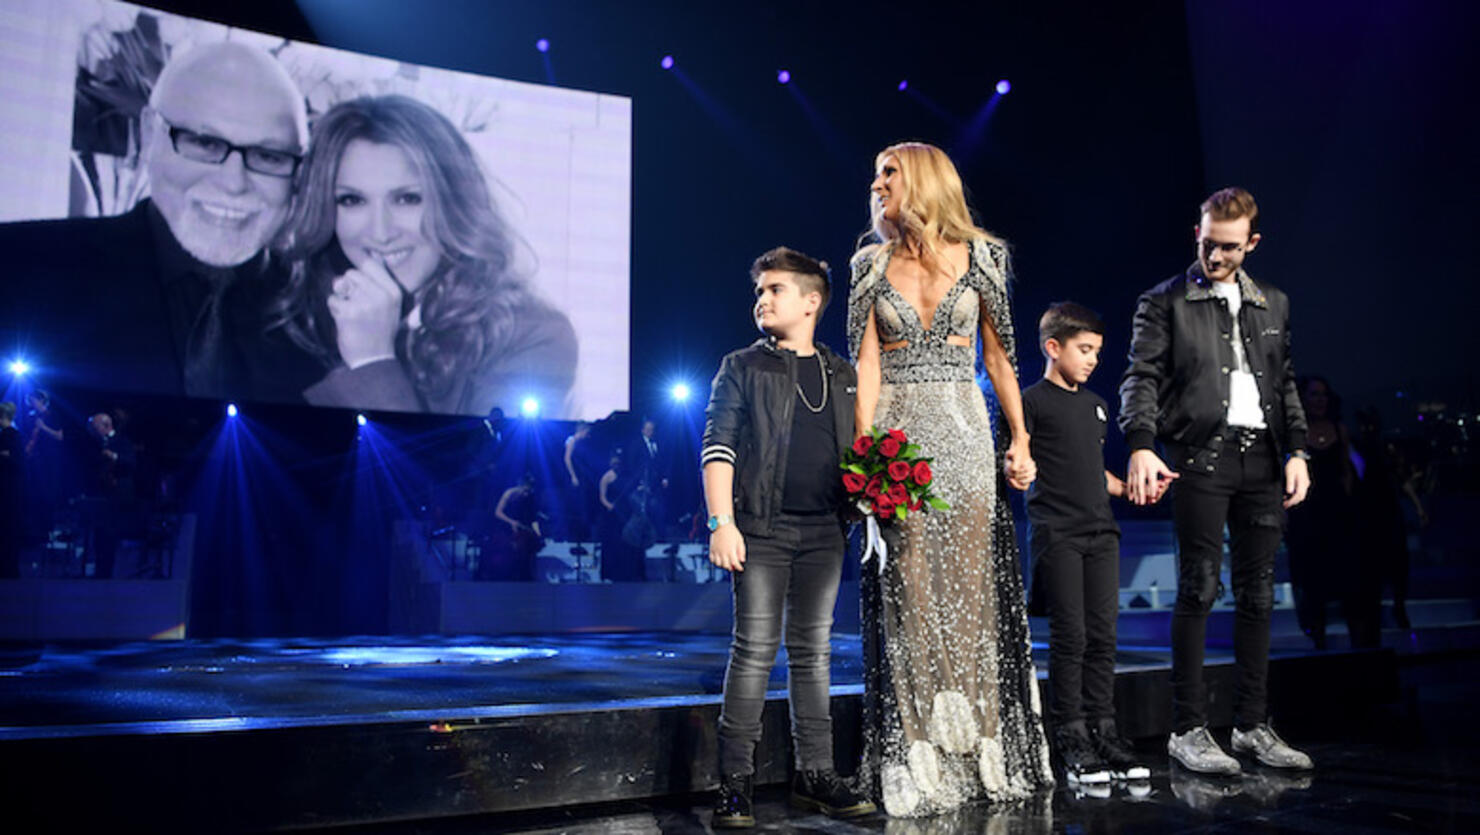 Celine Dion Performs The Final Show Of Her Las Vegas Residency At The Colosseum At Caesars Palace